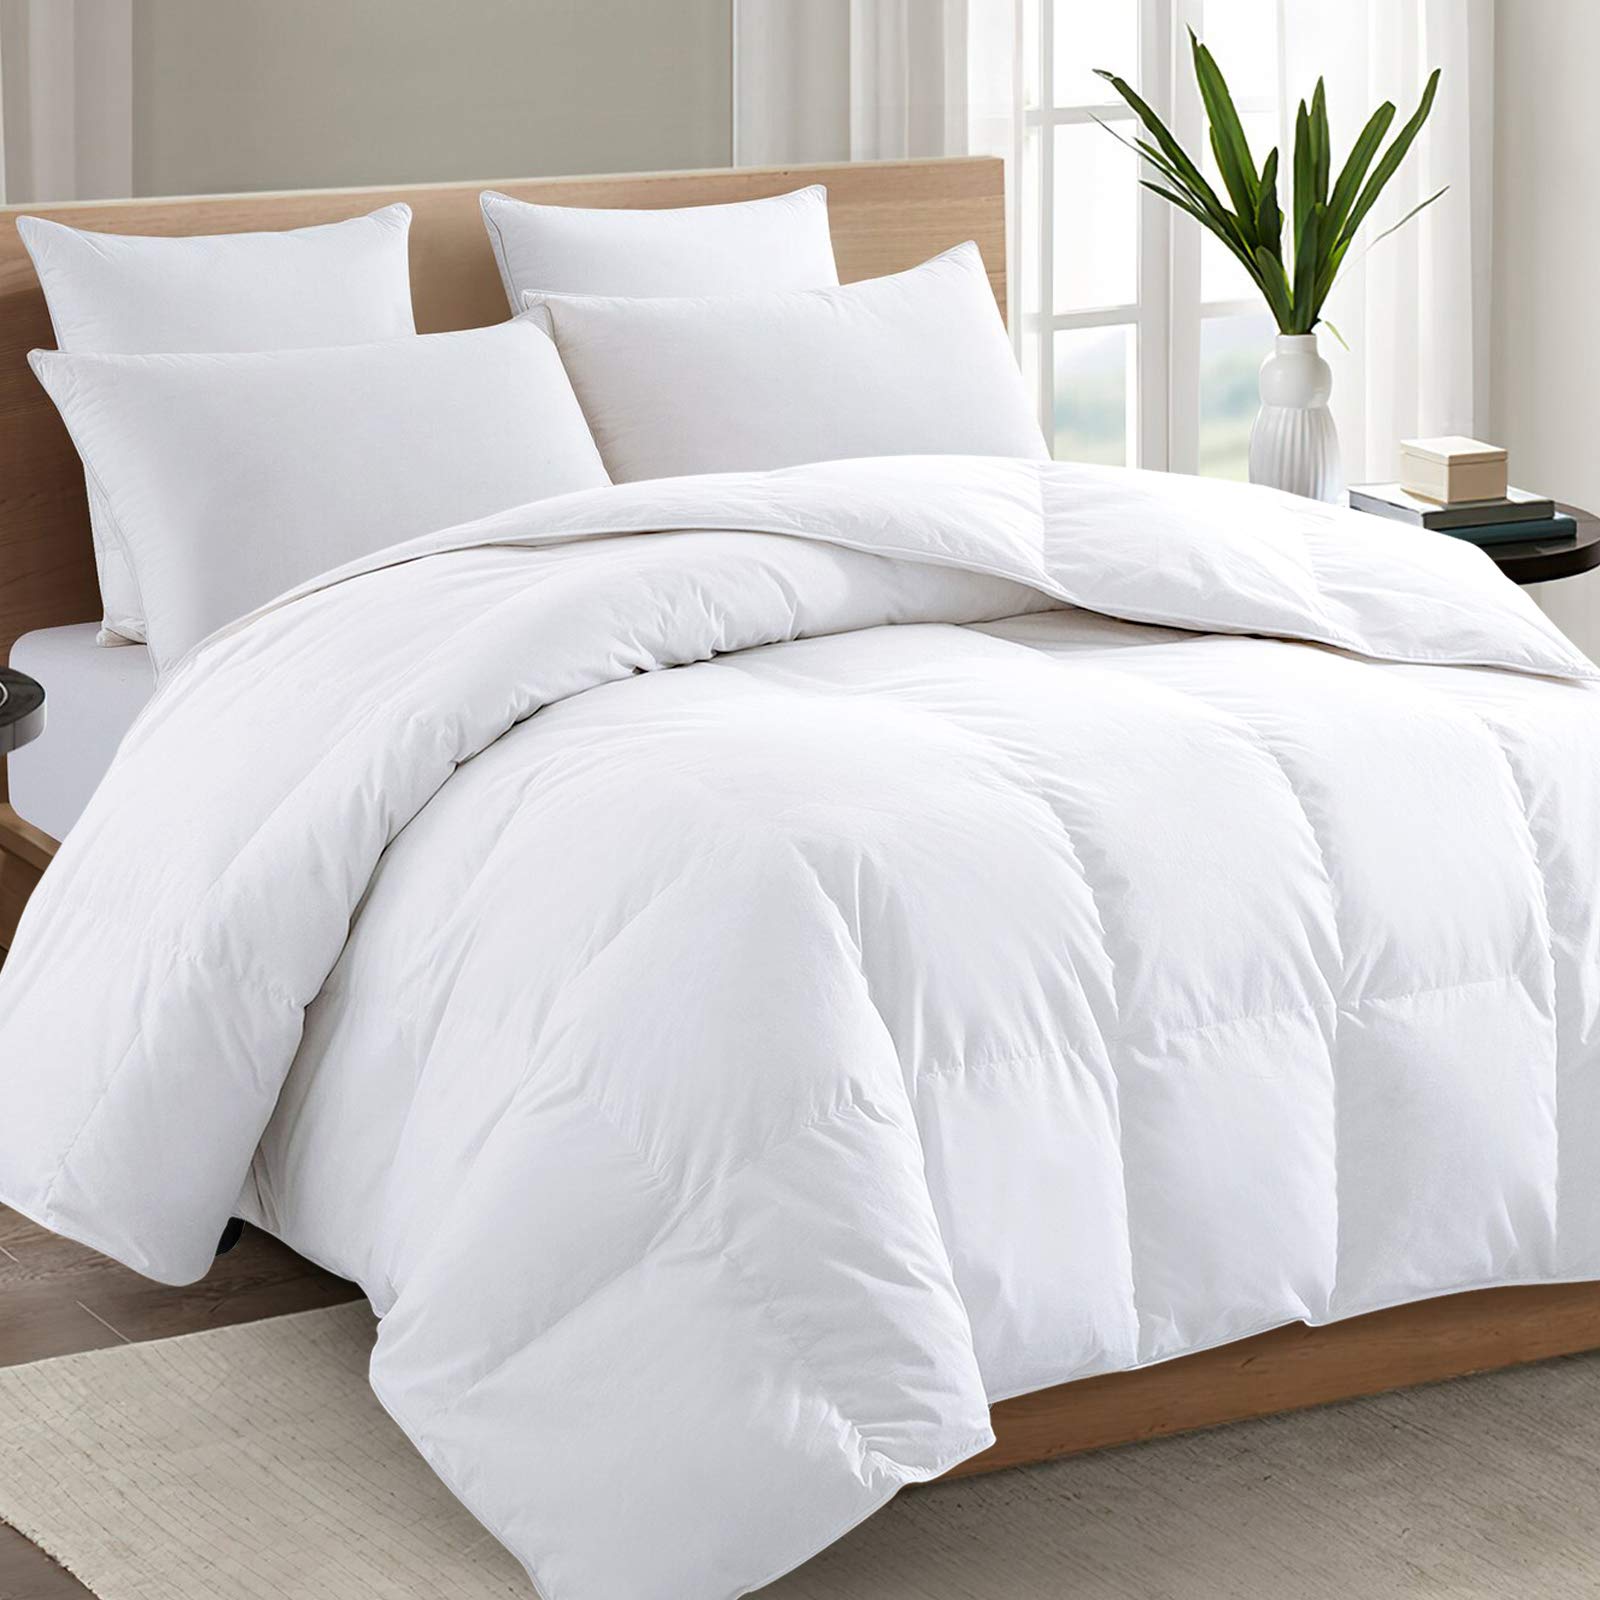 Utopia Bedding products » Compare prices and see offers now